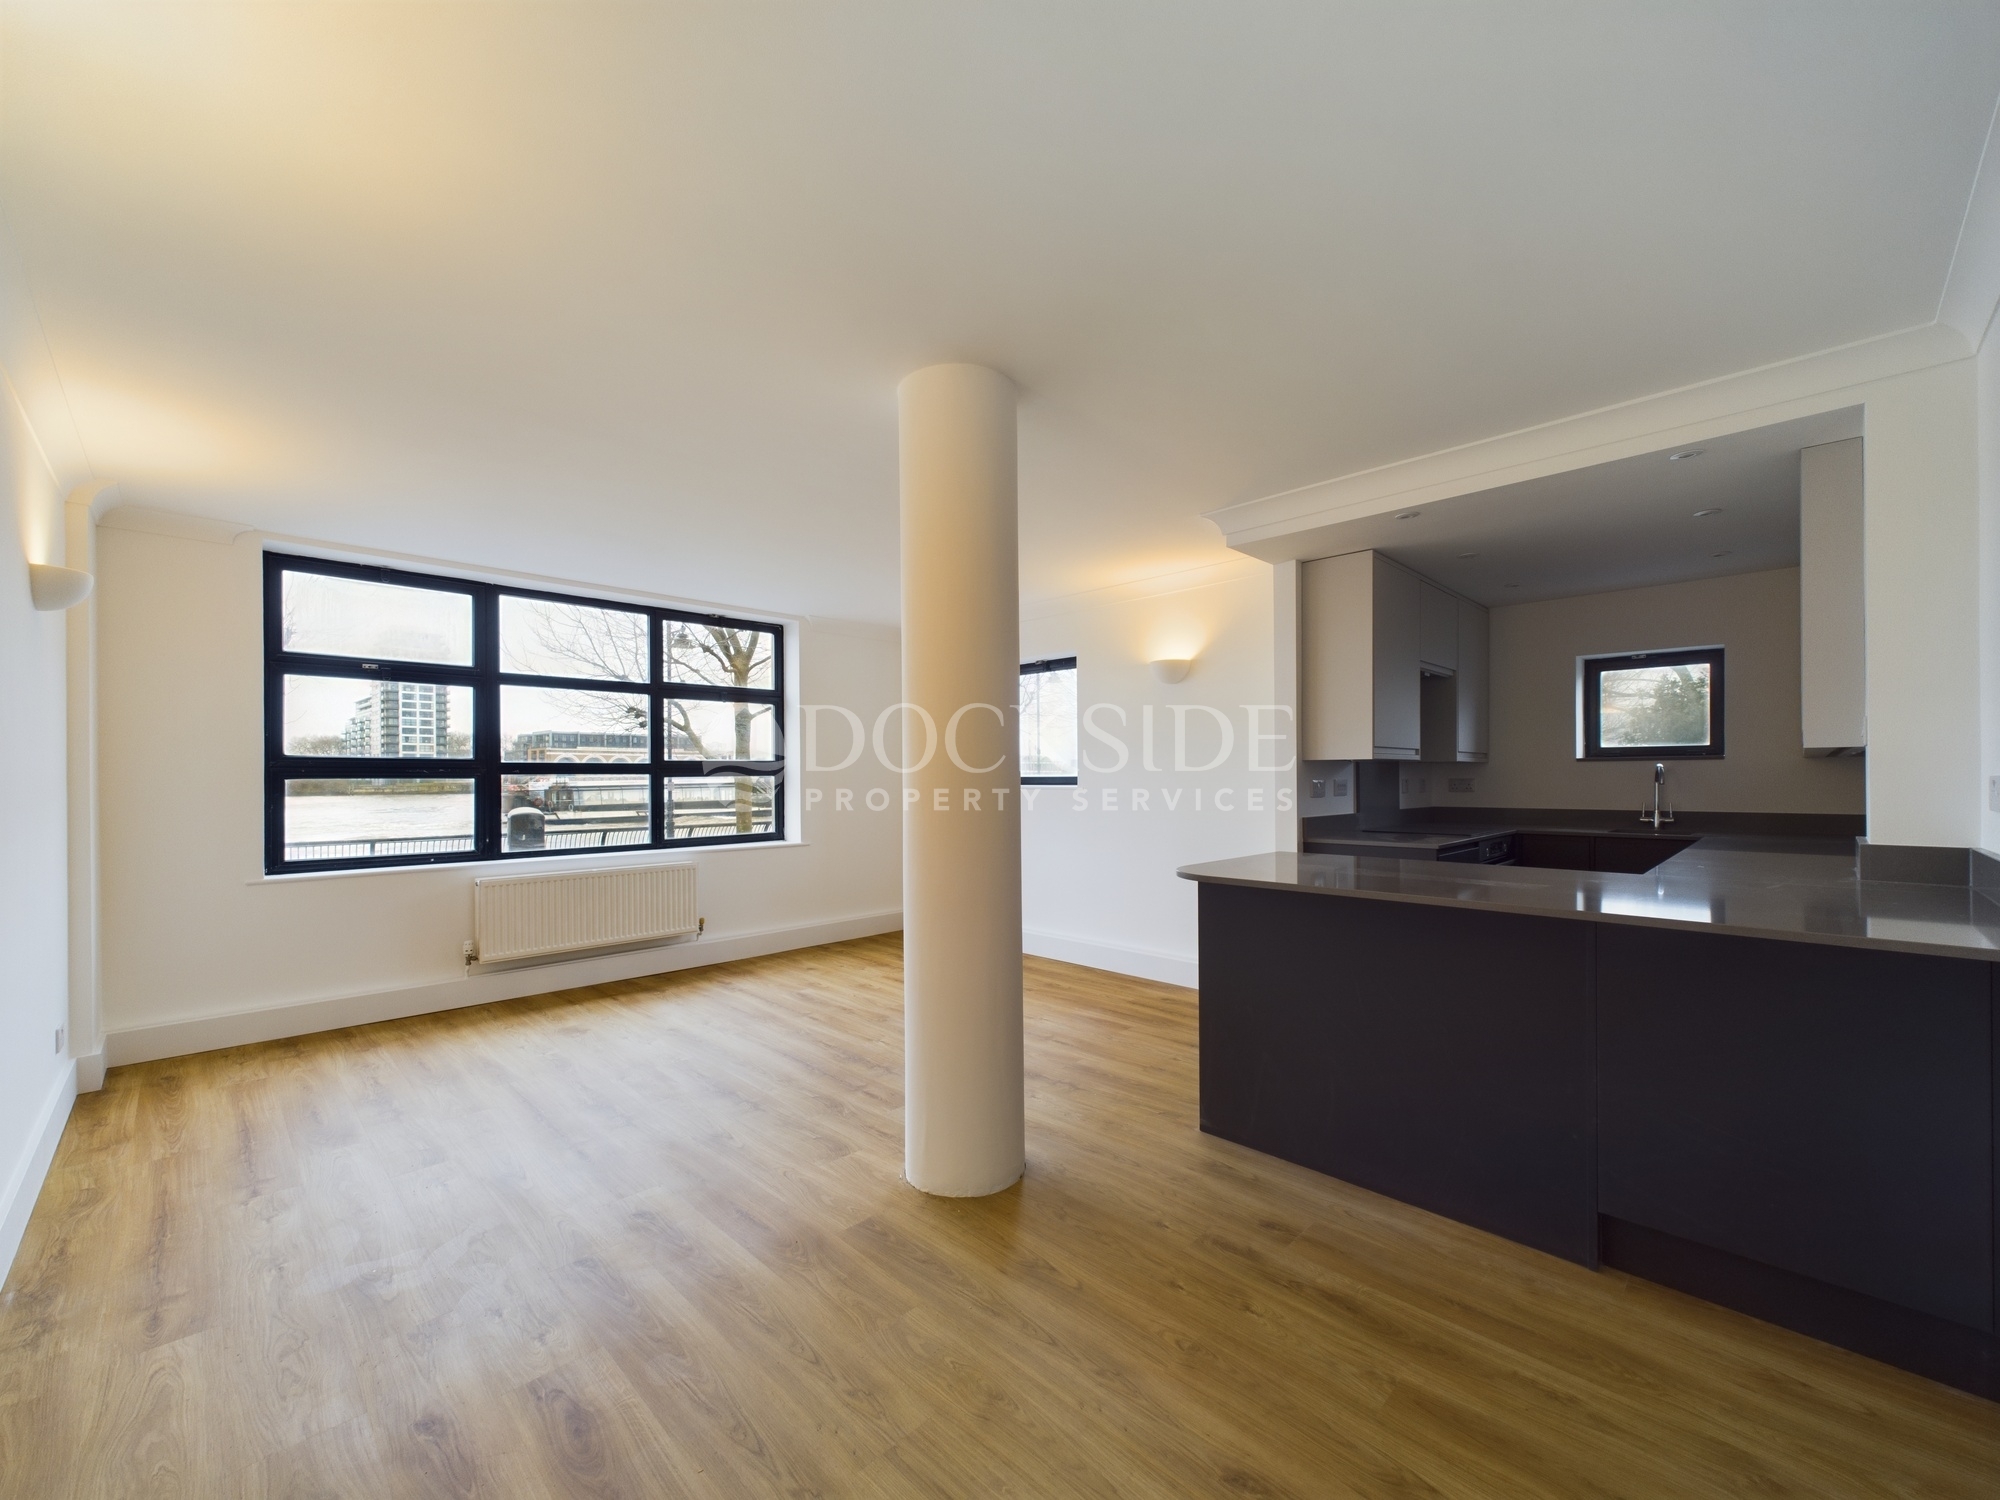 2 bed flat to rent in Burrells Wharf Square, London, E14 